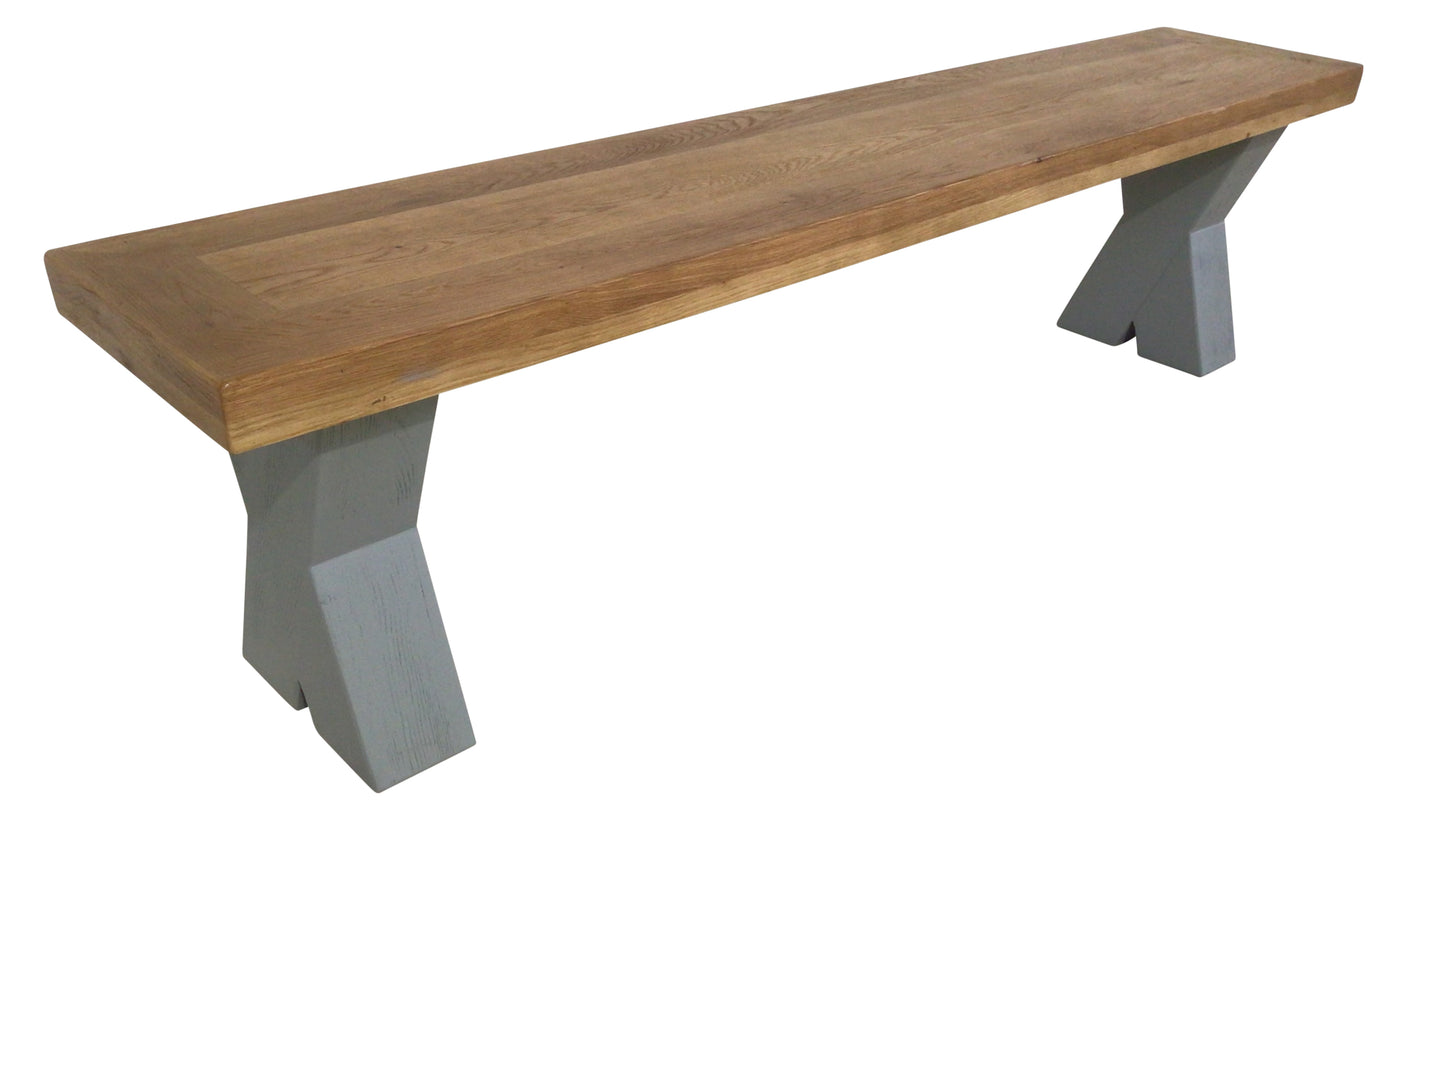 Maximus Oak 1.9m Bench painted French Grey